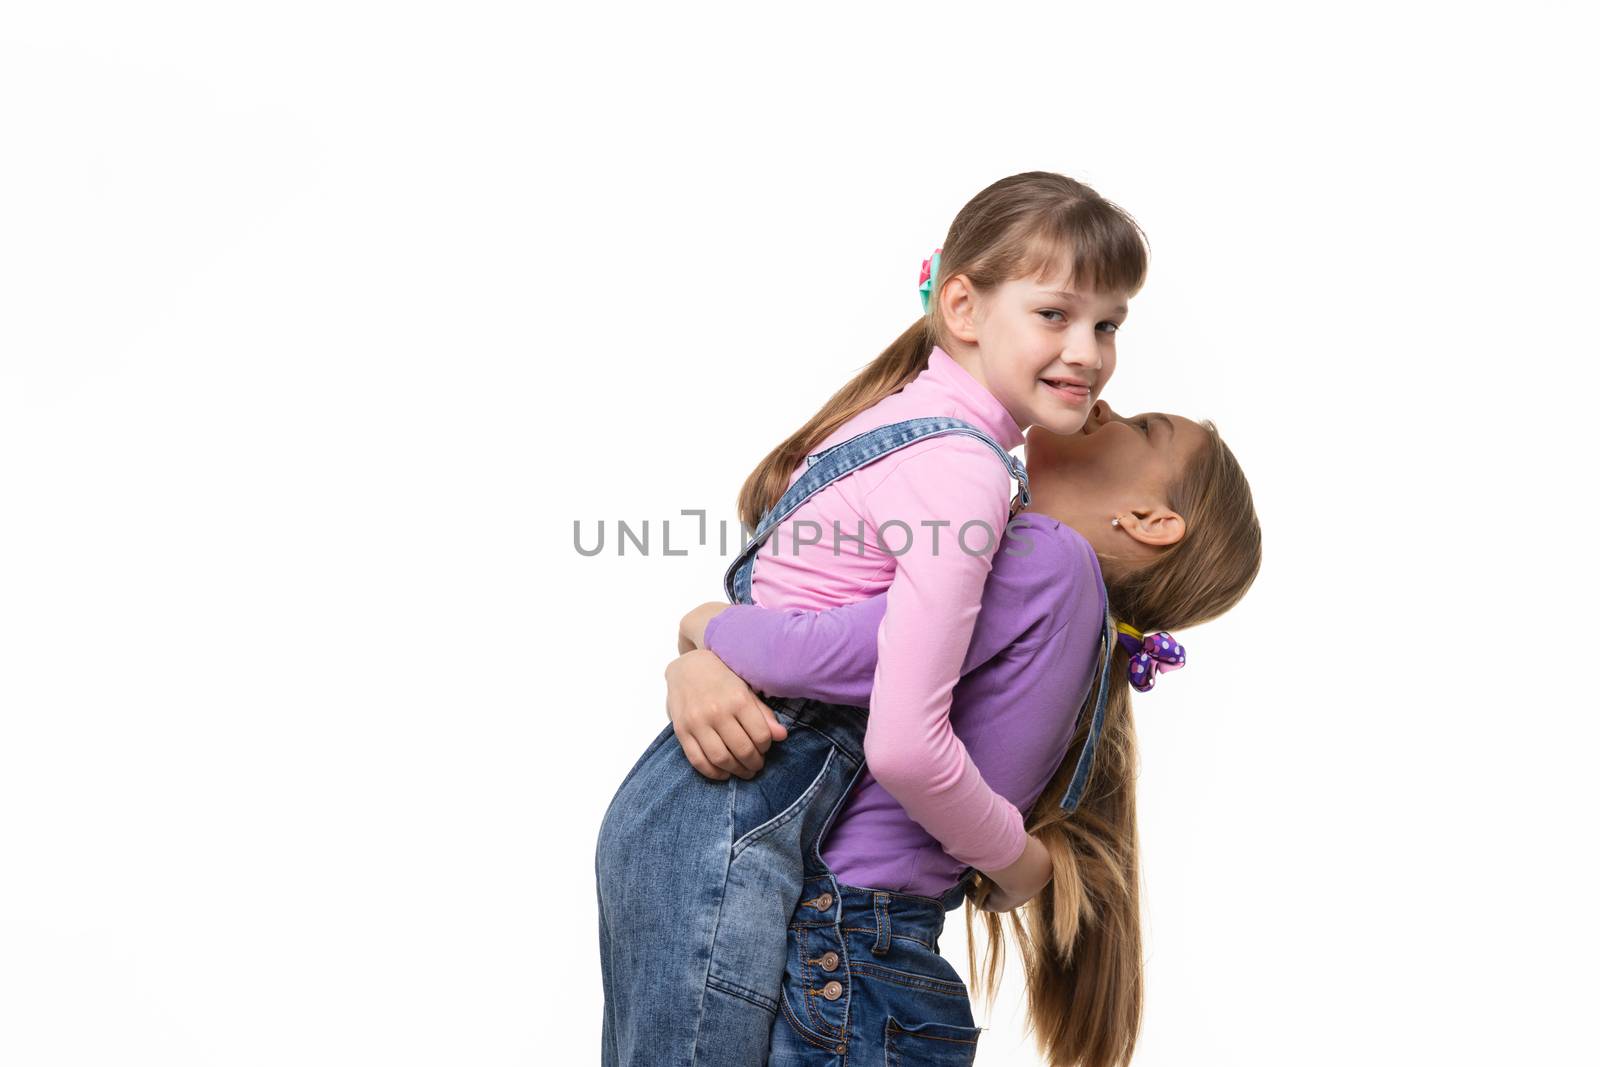 Girl lifted and hugged another a girl by Madhourse